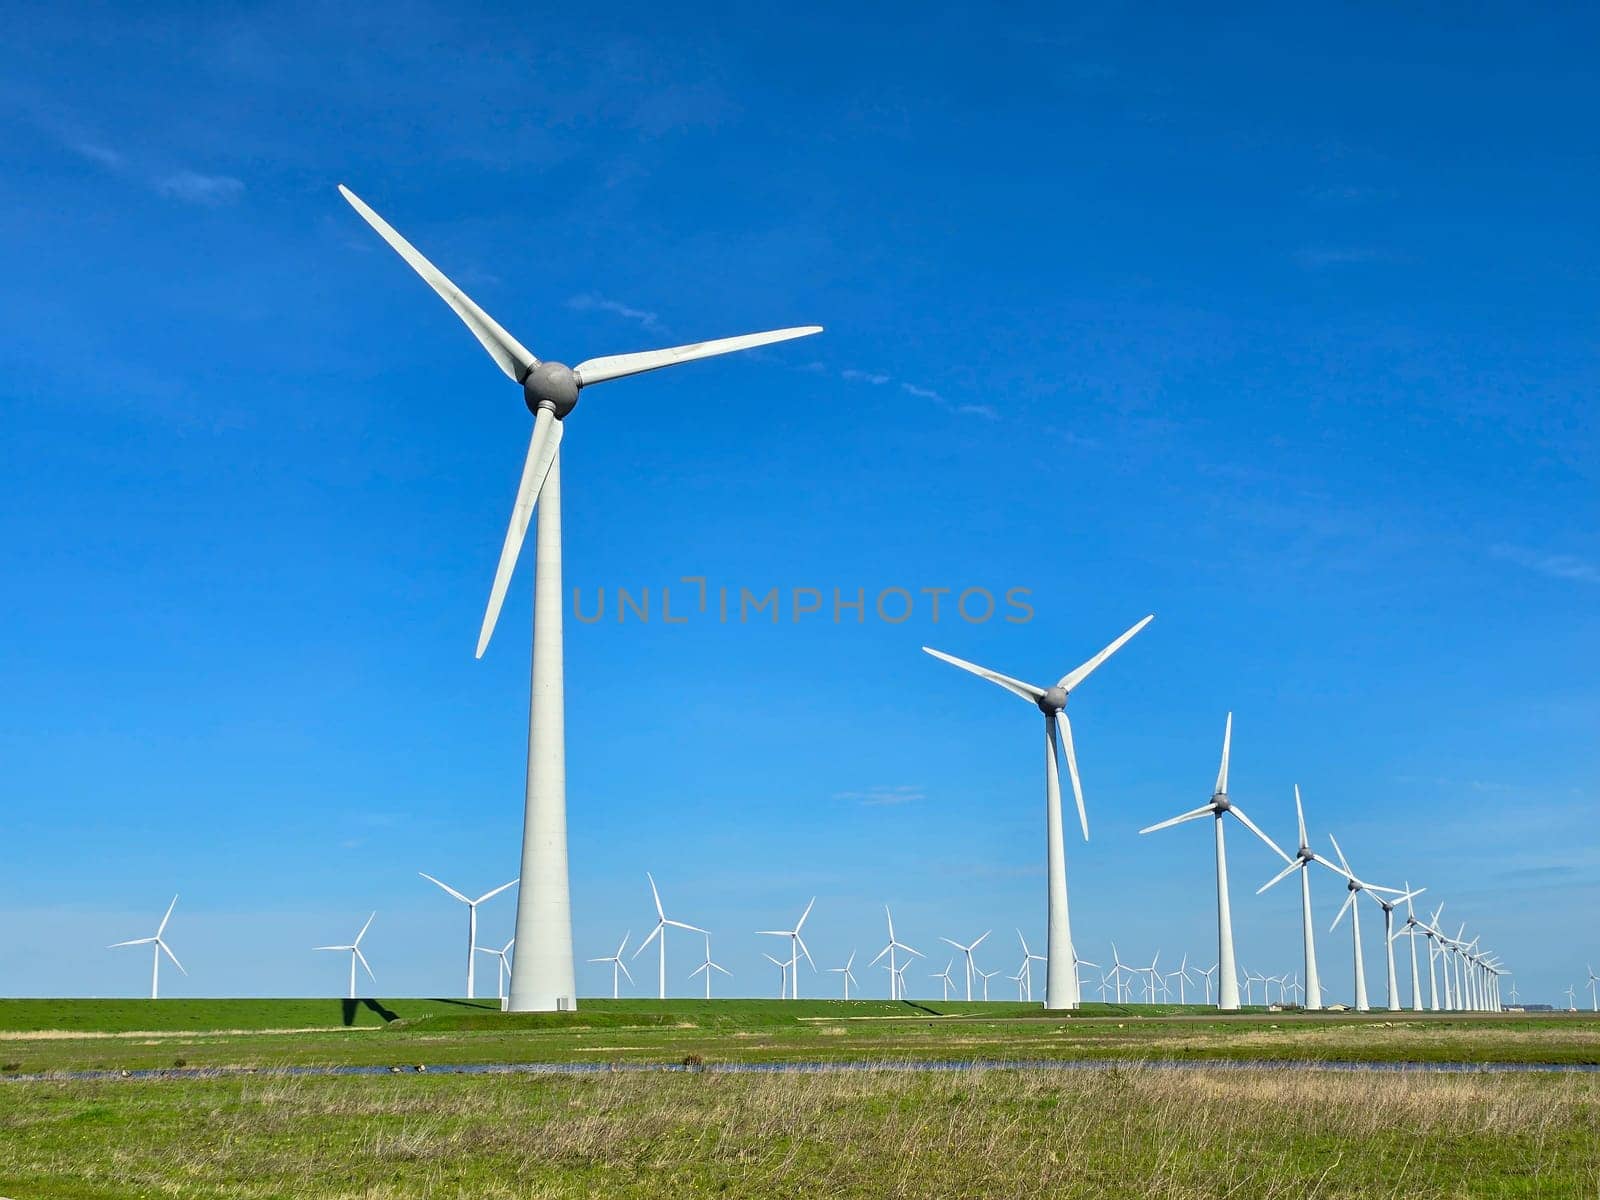 Windmill park in the meadow with a blue sky, view of windmill turbines on a Dutch dike generating green energy electrically, windmills isolated at sea in the Netherlands.